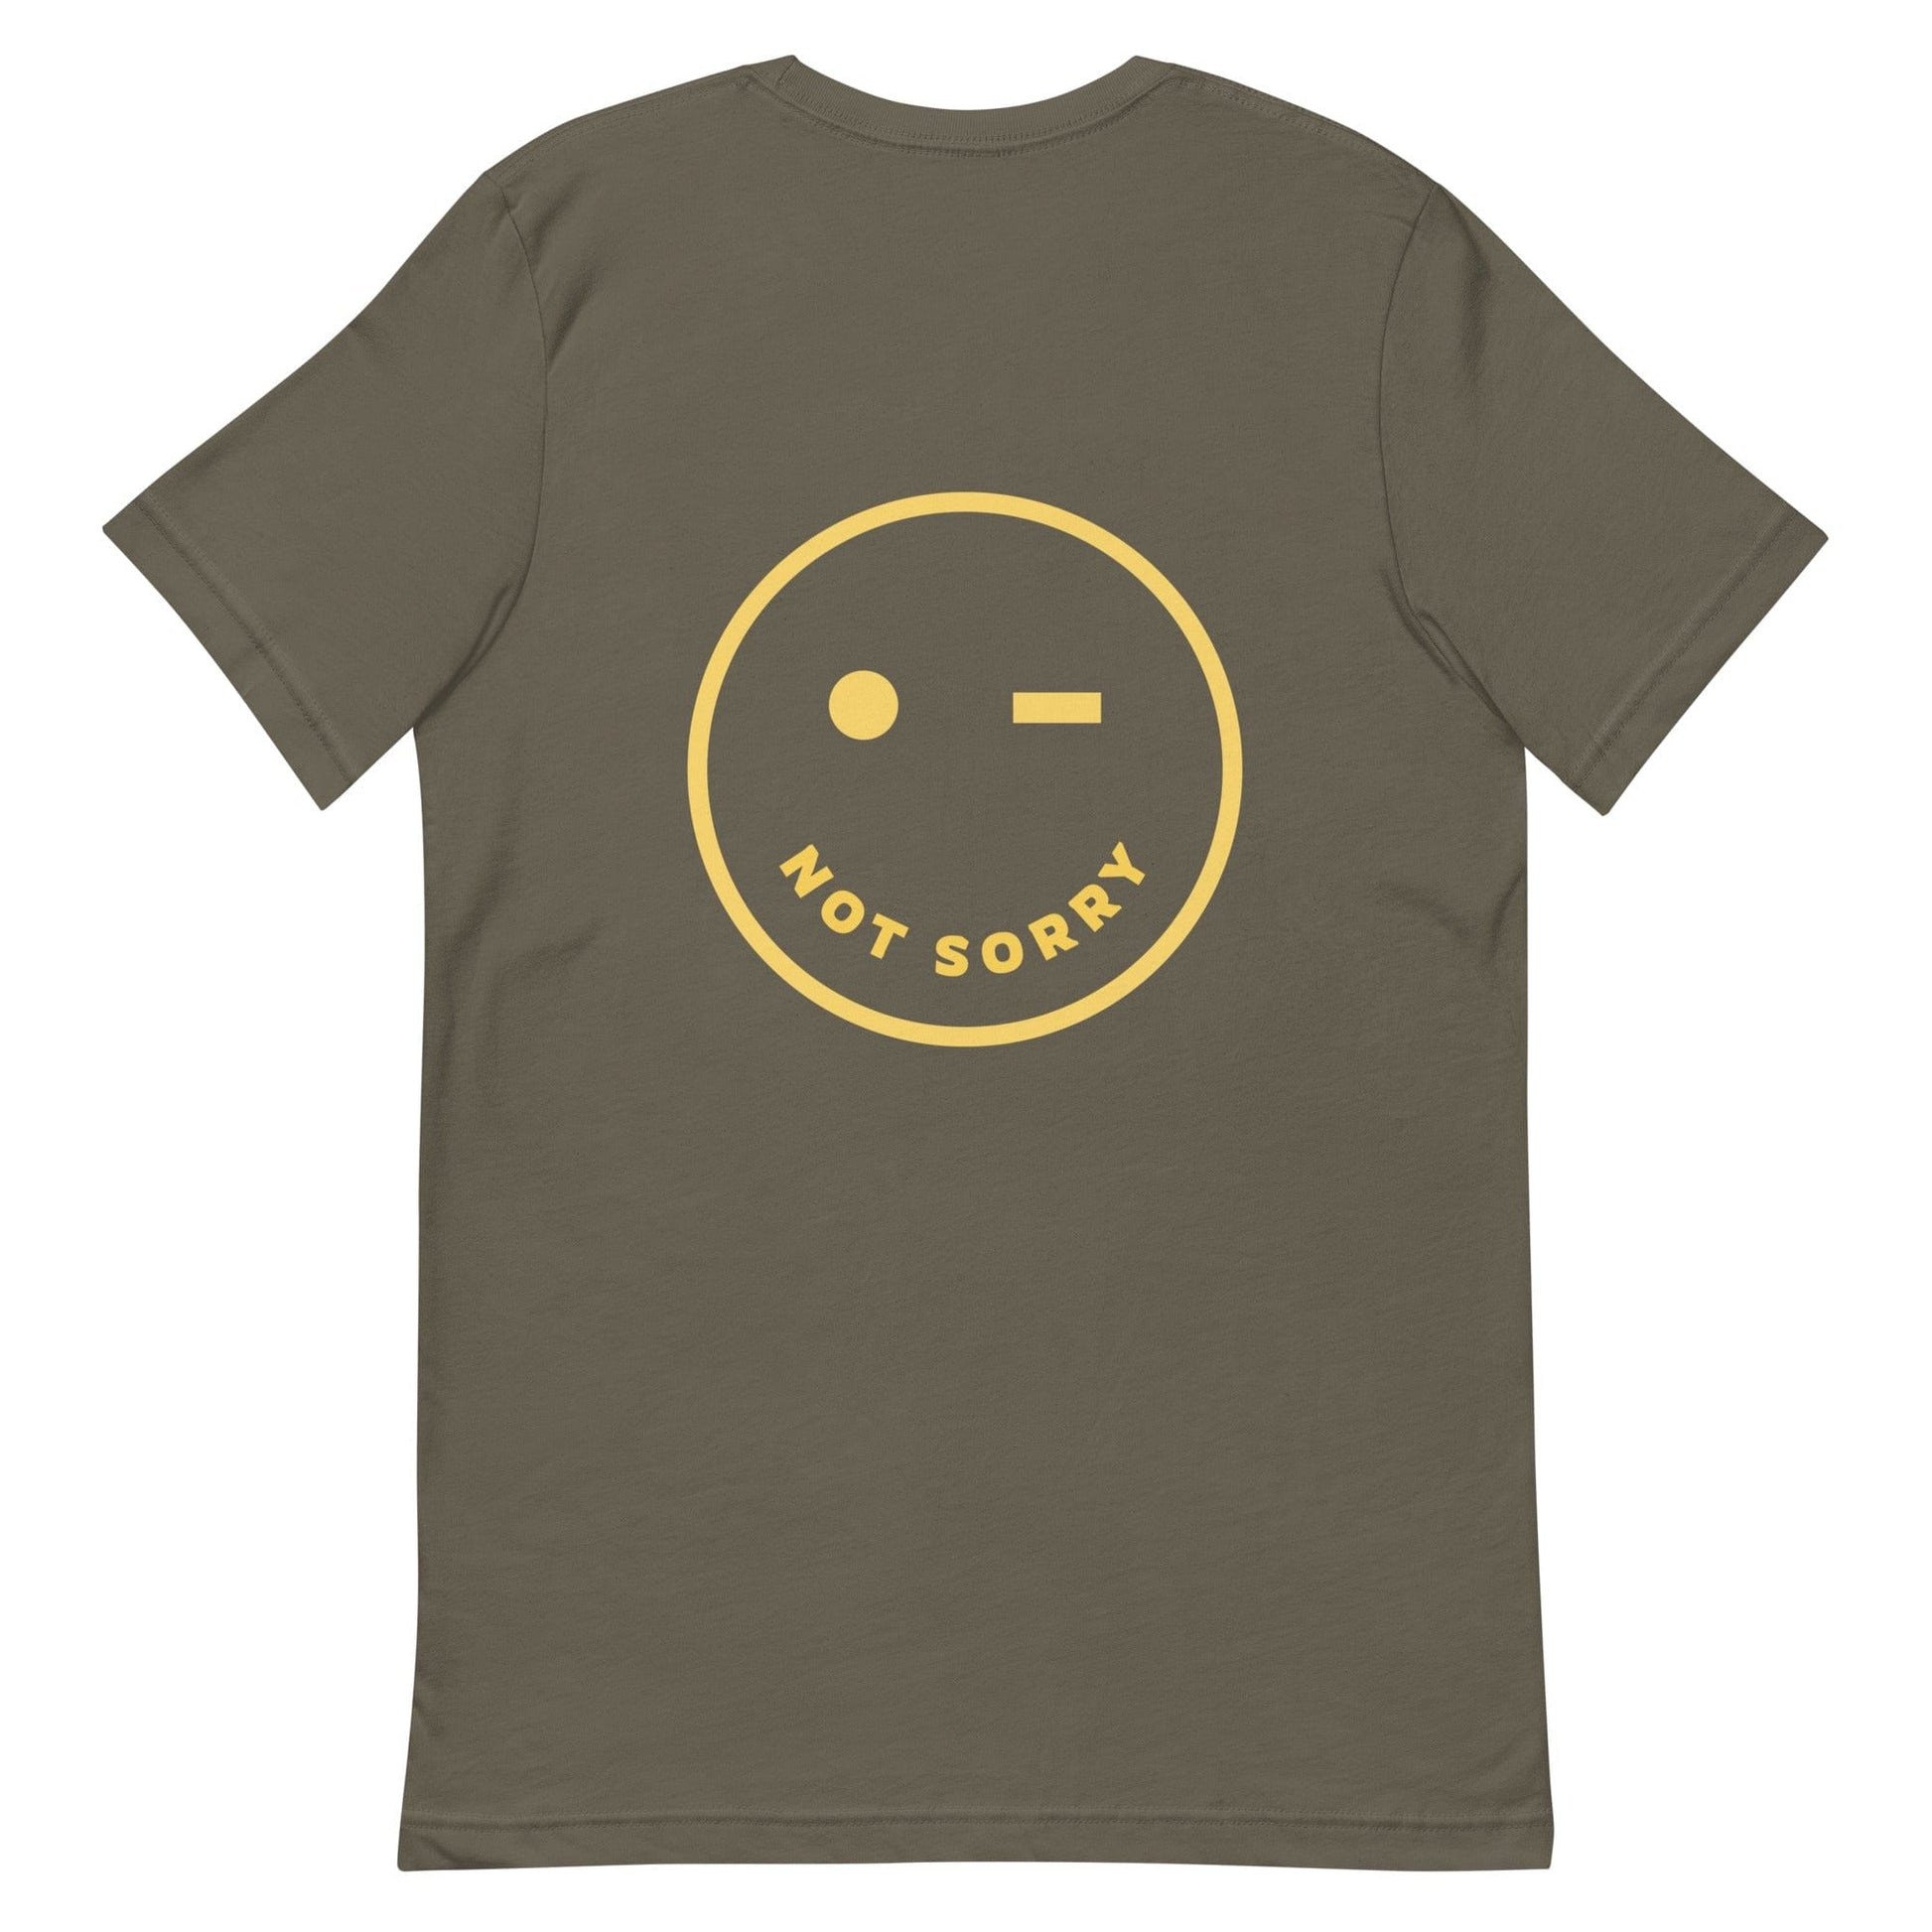 genderless-sorry-not-sorry-tshirt-quote-apparel-army-at-feminist-define